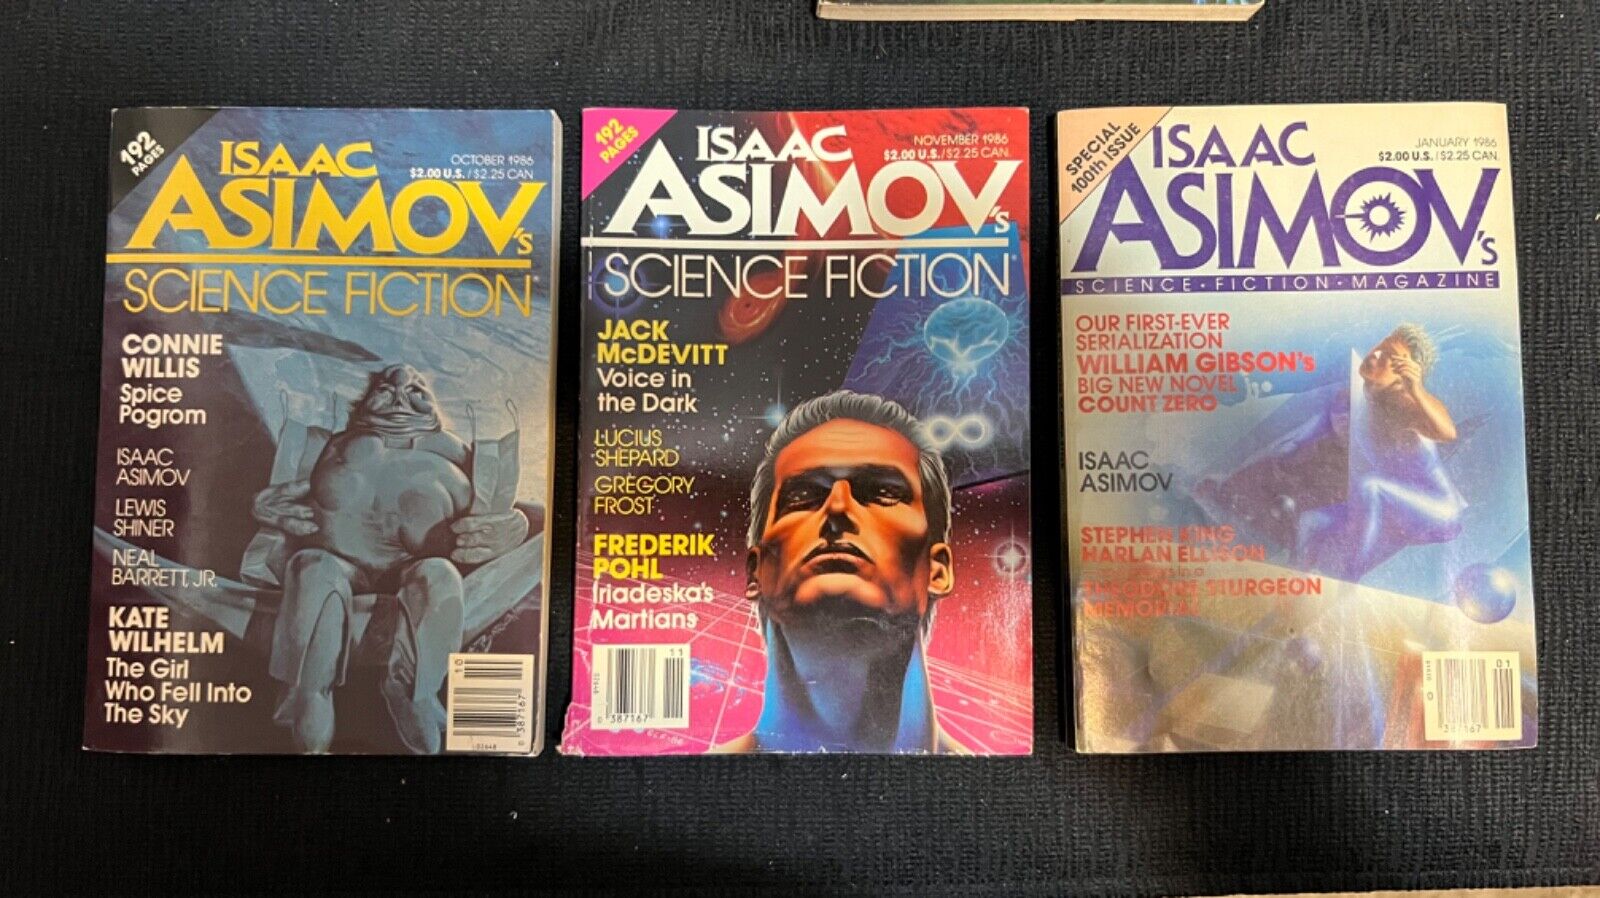 Isaac Asimov's Science Fiction Magazine / Mixed Lot of 3 from 1986 Stephen King